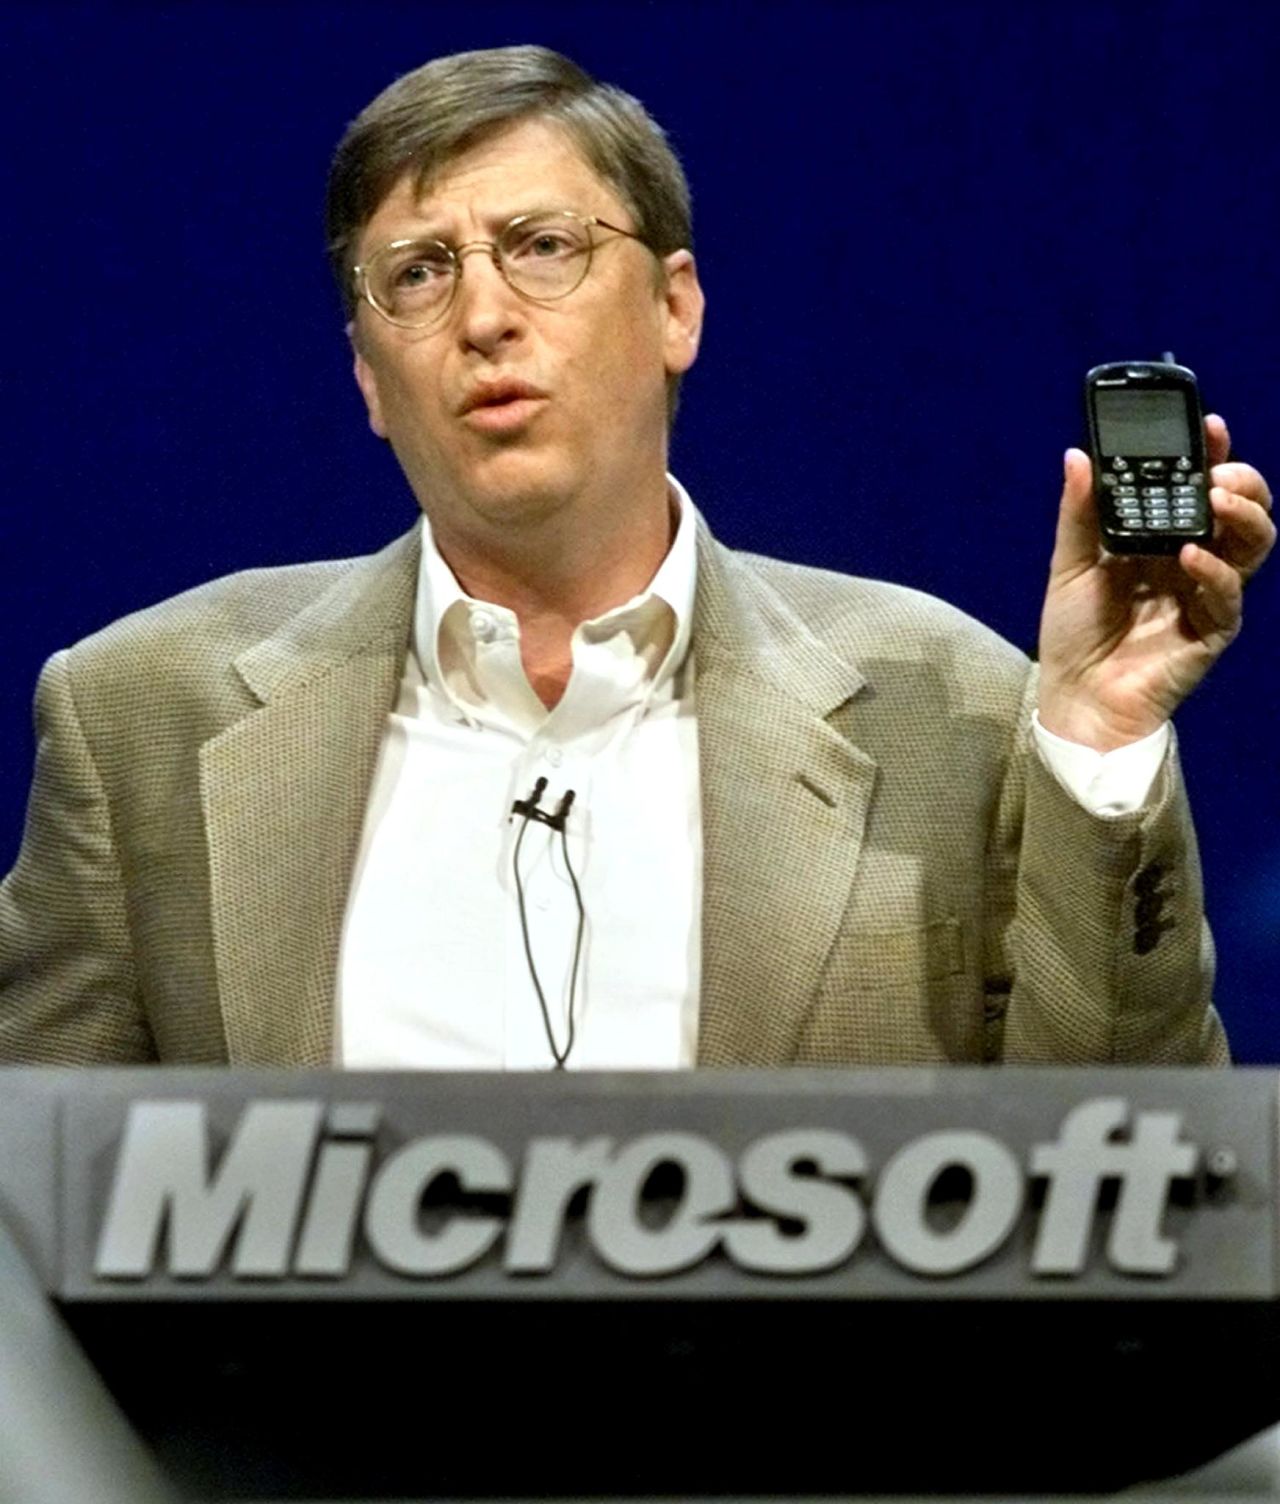 Even Microsoft chairman Bill Gates was not immune from holding ugly phones. Here he makes a point with a "new generation" cellphone during his annual "state of the industry" speech at the COMDEX convention in Las Vegas in November 2000.